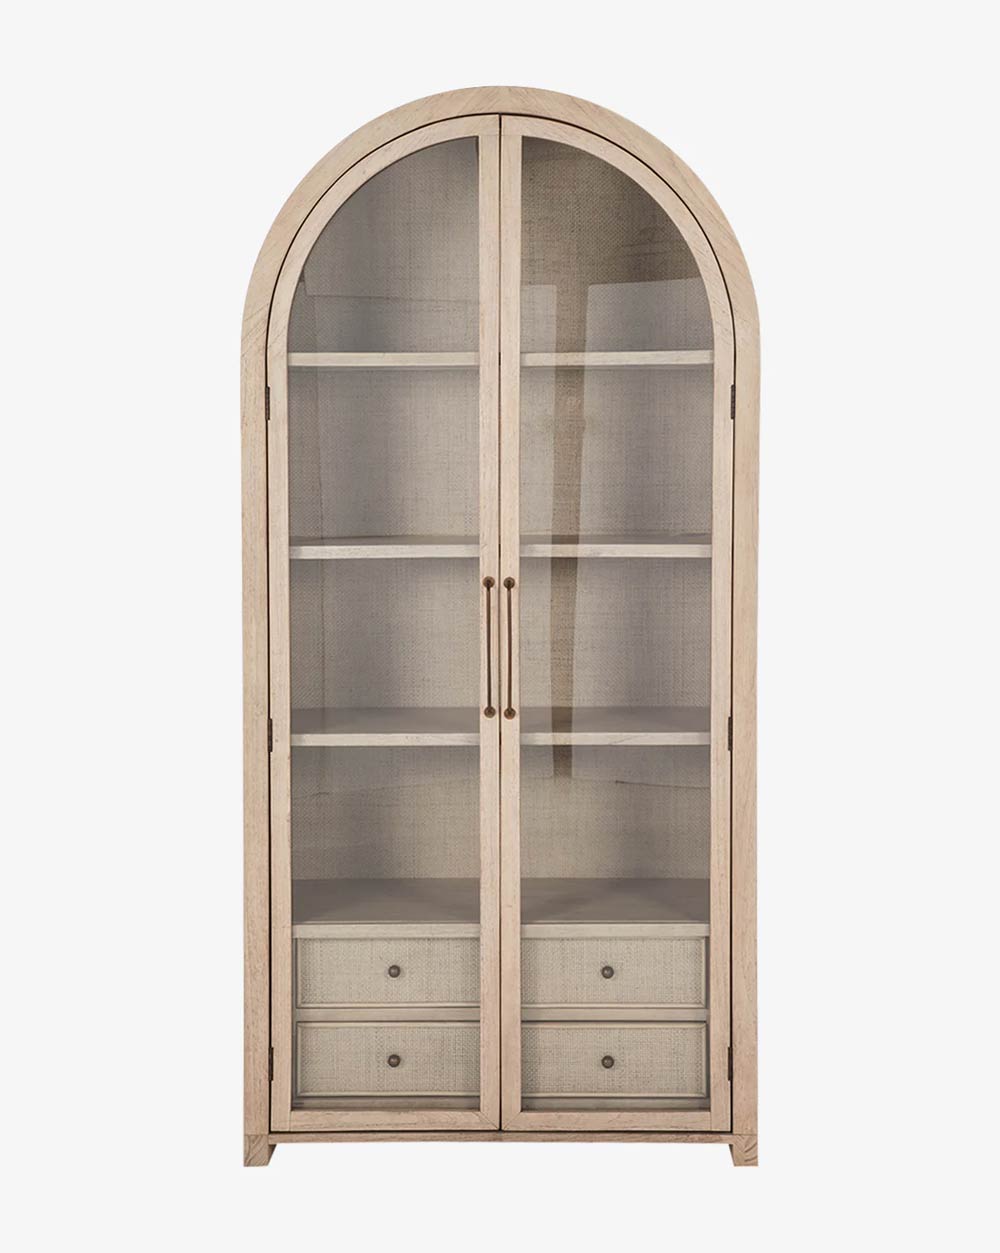 Arched cabinet with rattan drawers